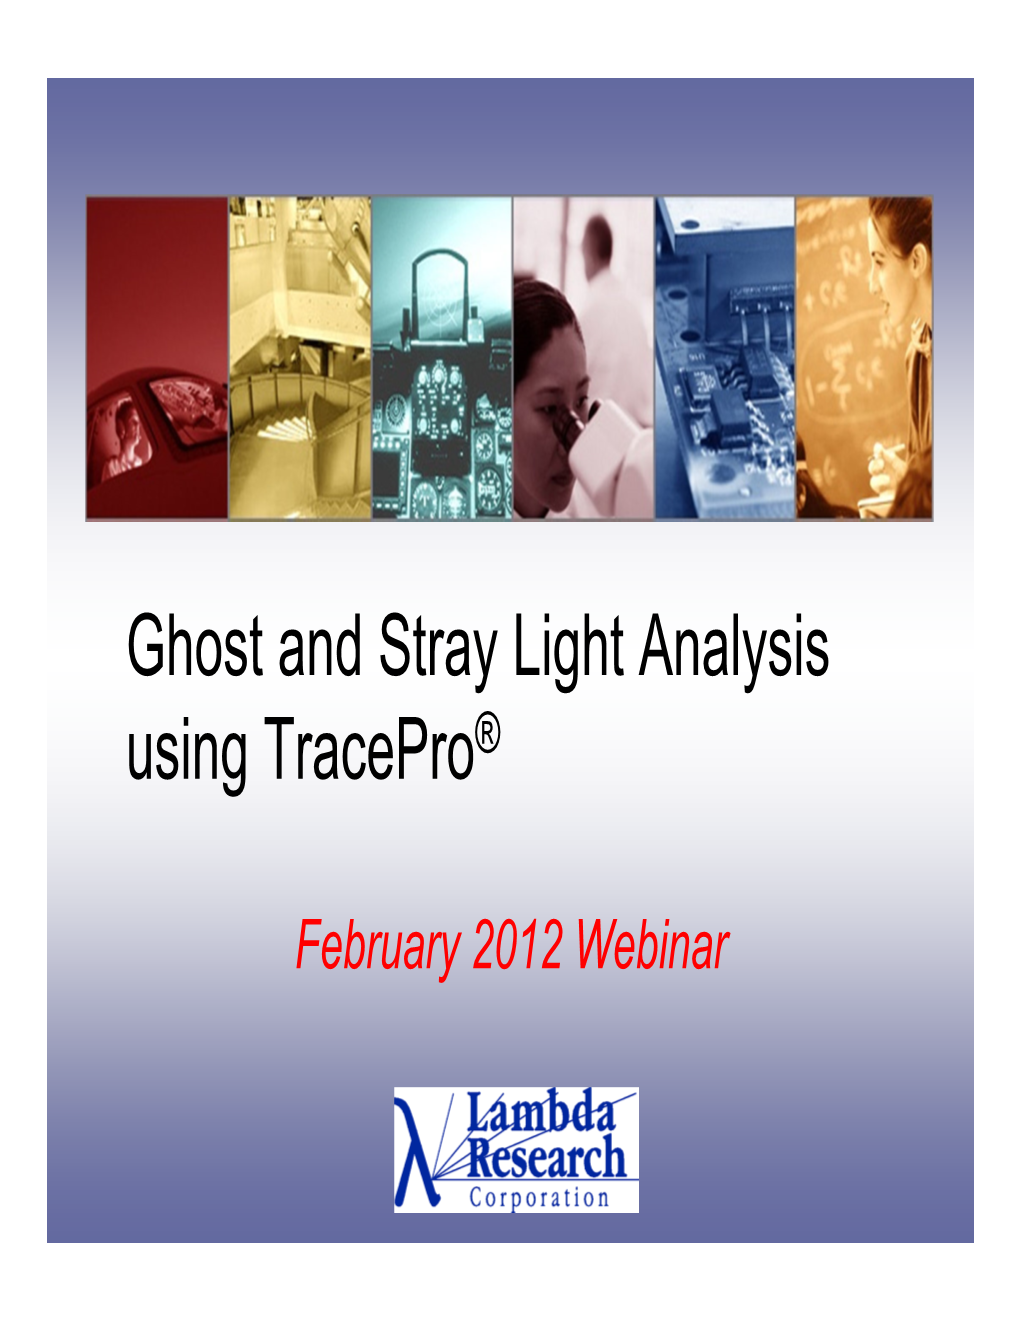 Ghost and Stray Light Analysis Using Tracepro ®